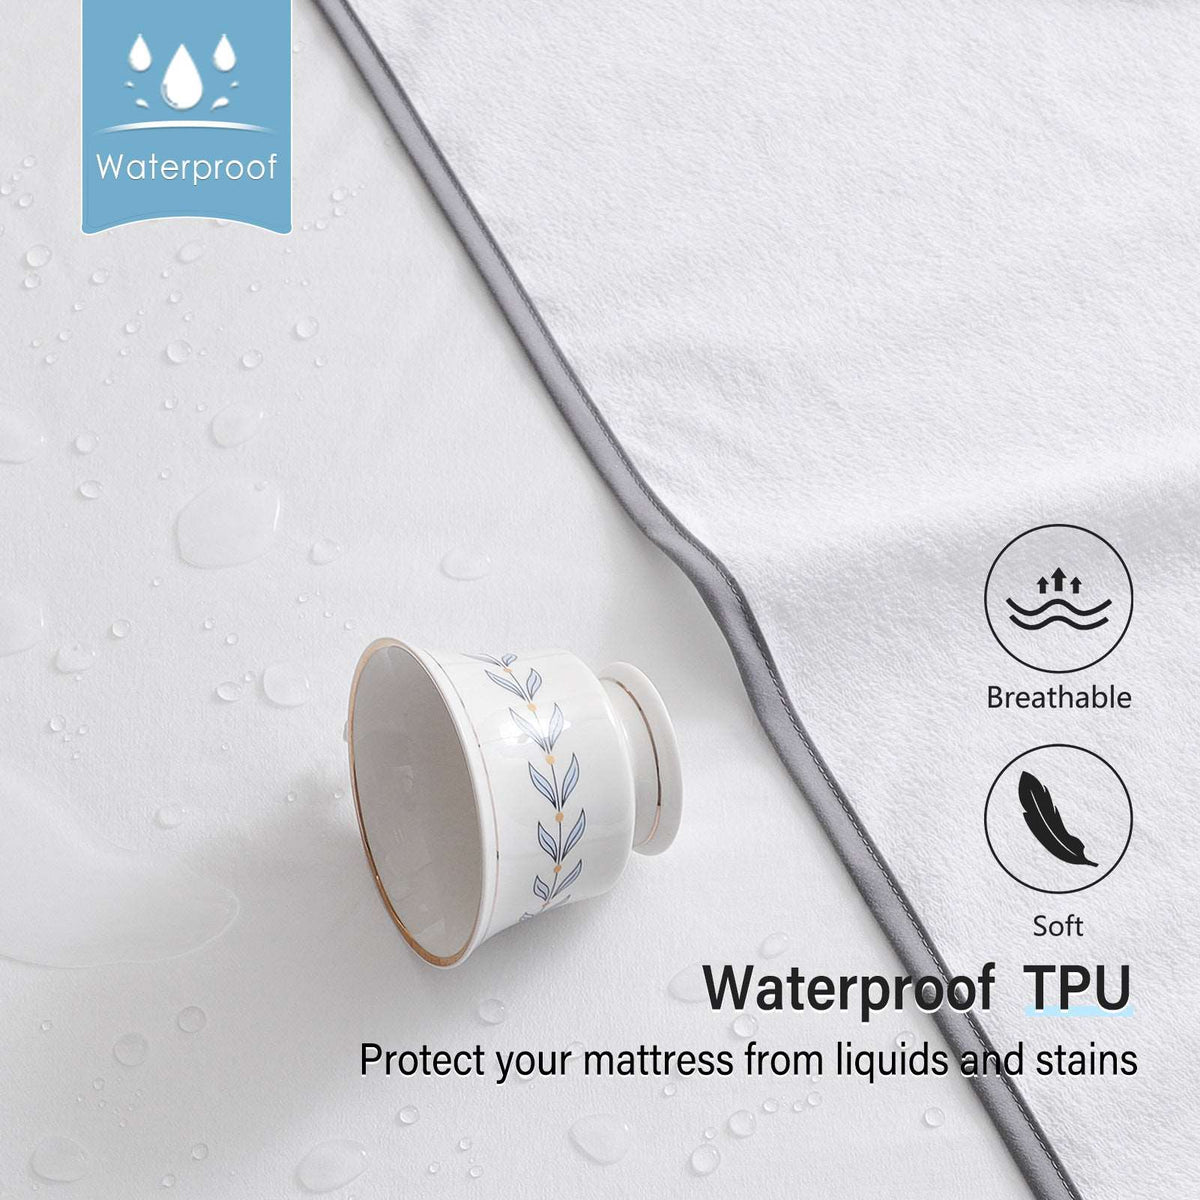 Mattress breathable waterproof cover protector with elastic bands in the 4 corners.